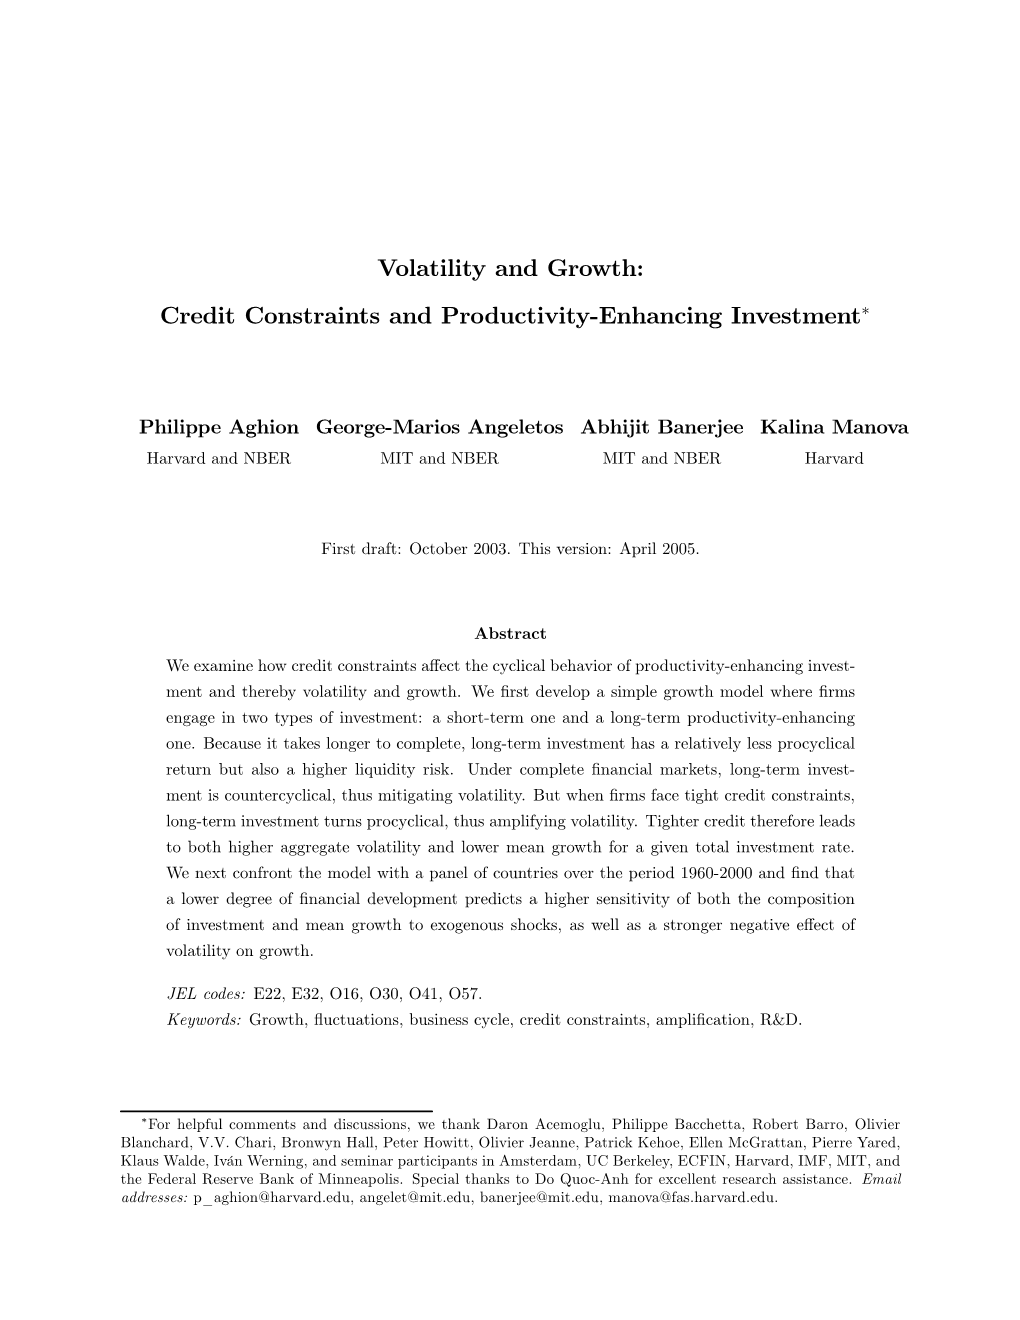 Volatility and Growth: Credit Constraints and Productivity-Enhancing Investment